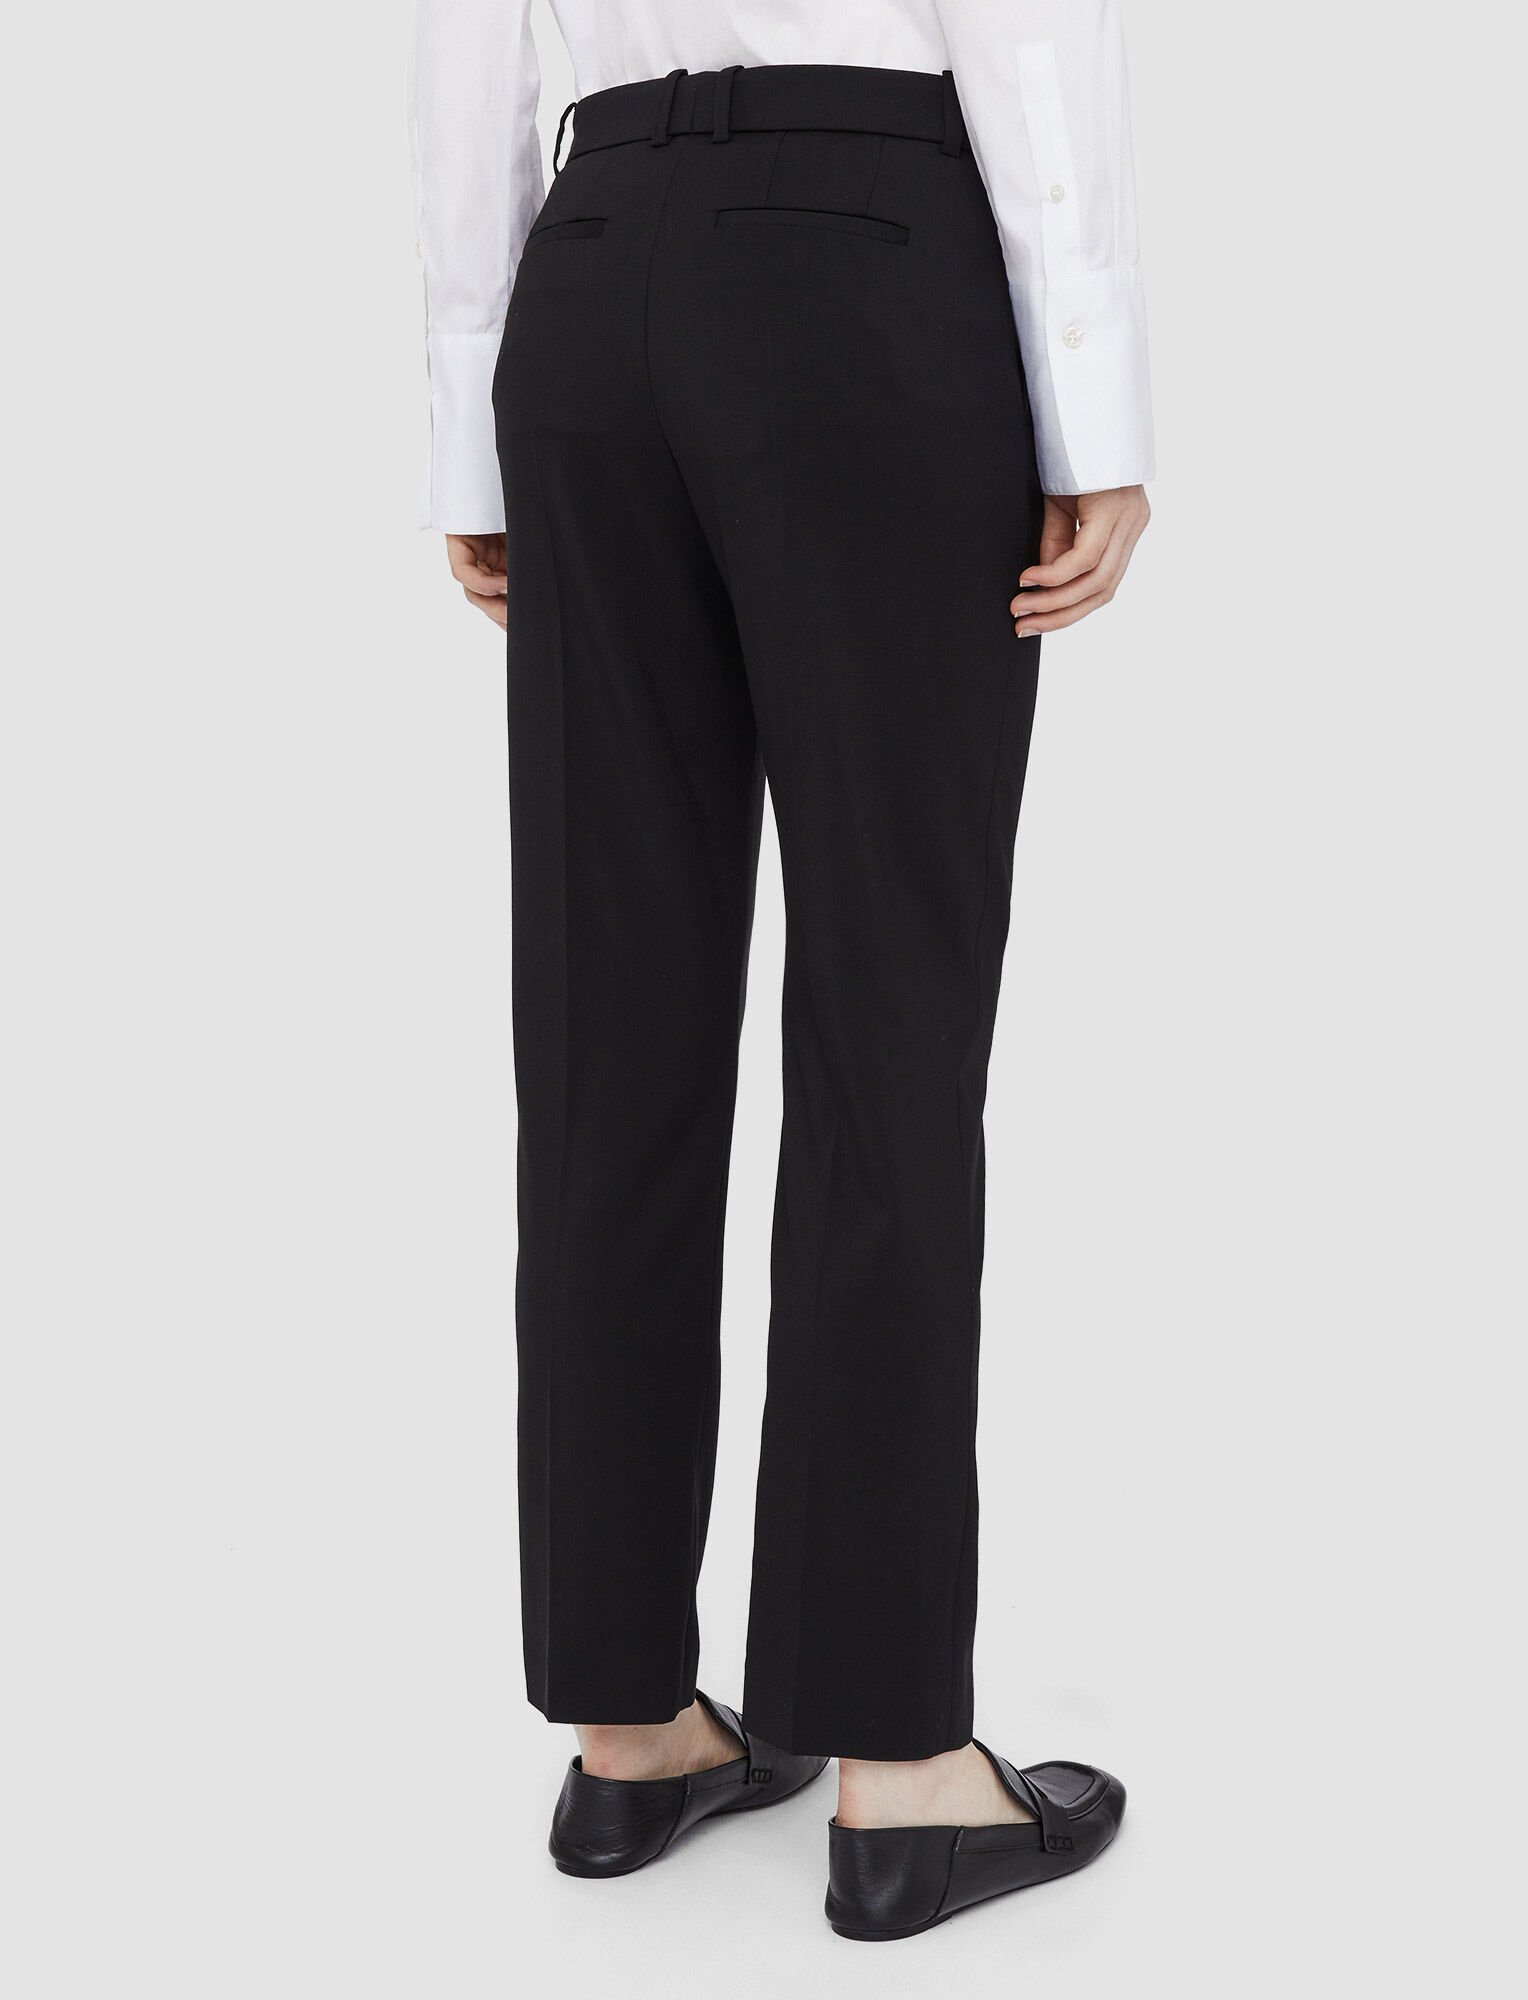 Joseph, Tailoring Wool Stretch Coleman Trousers, in Black